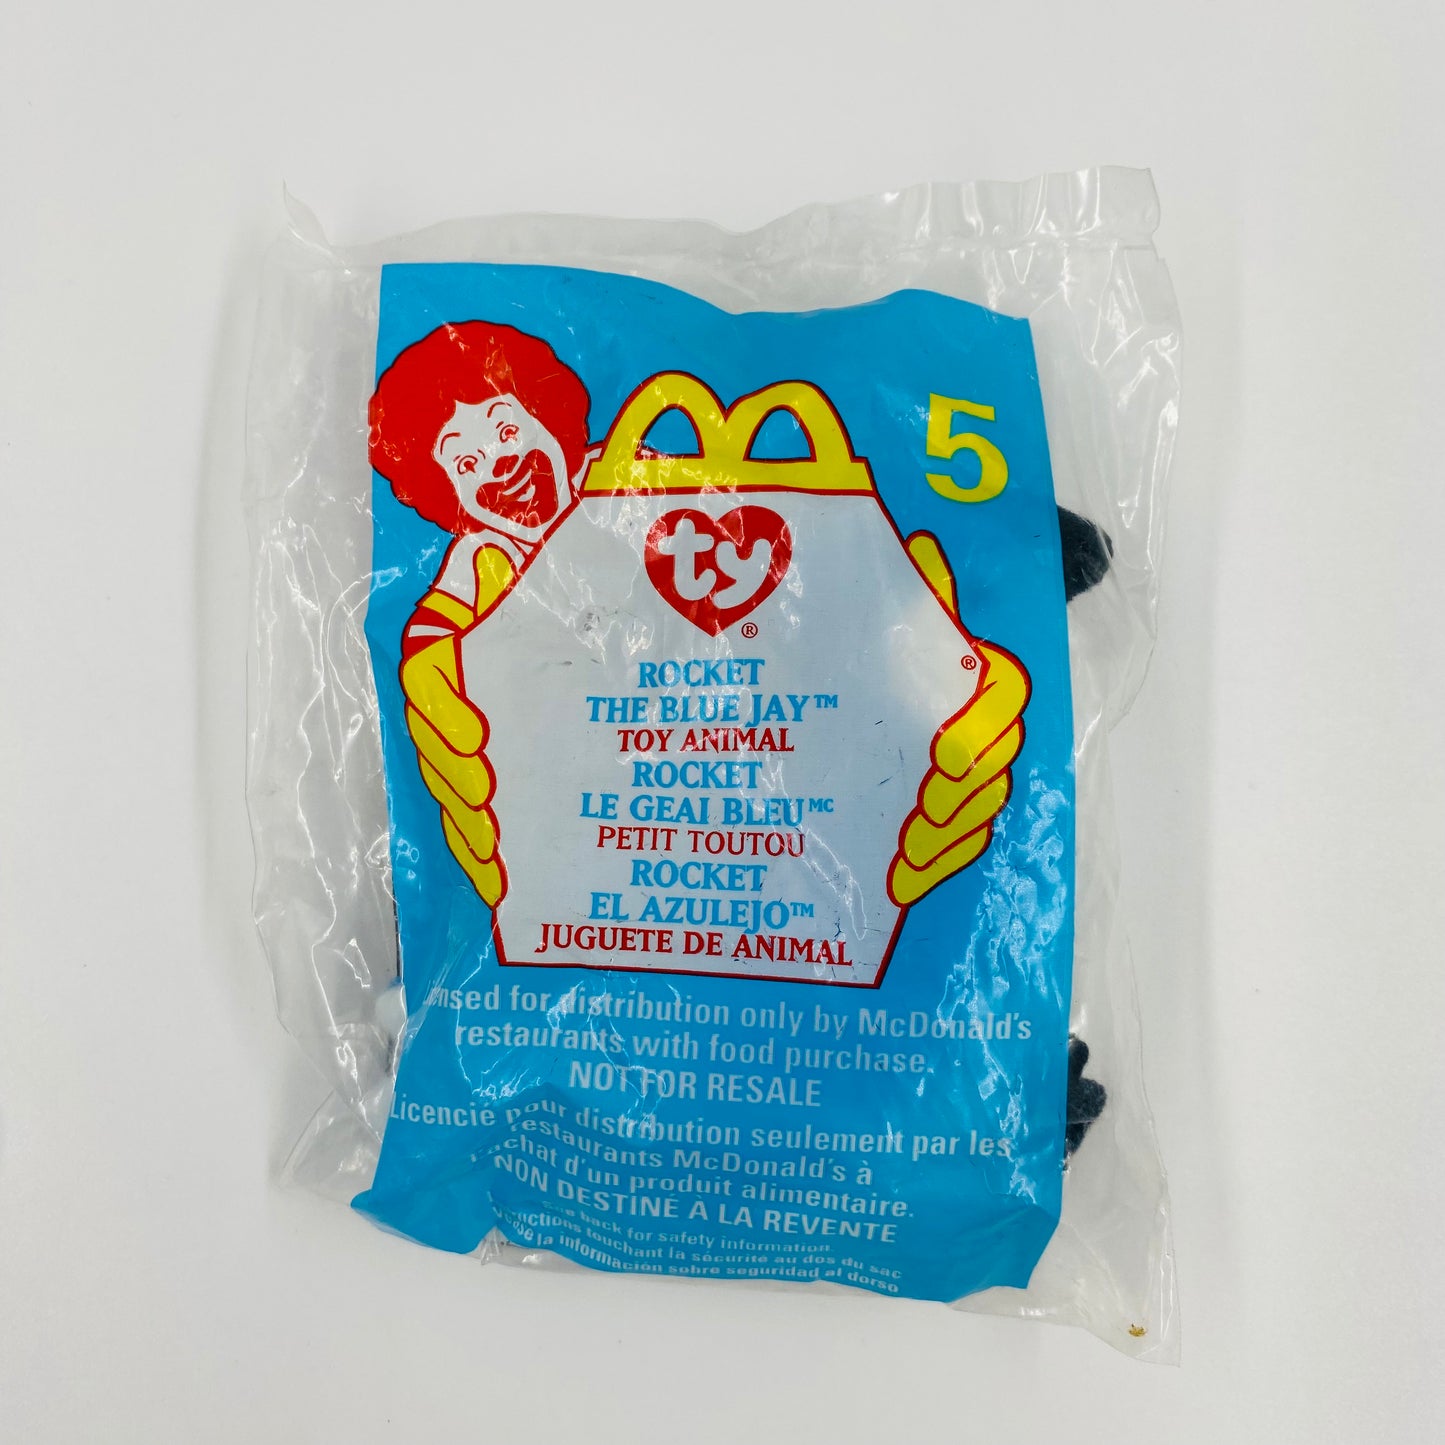 Teenie Beanie Babies complete set of 16 McDonald's Happy Meal bean bag plush toy animals (1999) 11 bagged, 4 carded & 1 loose